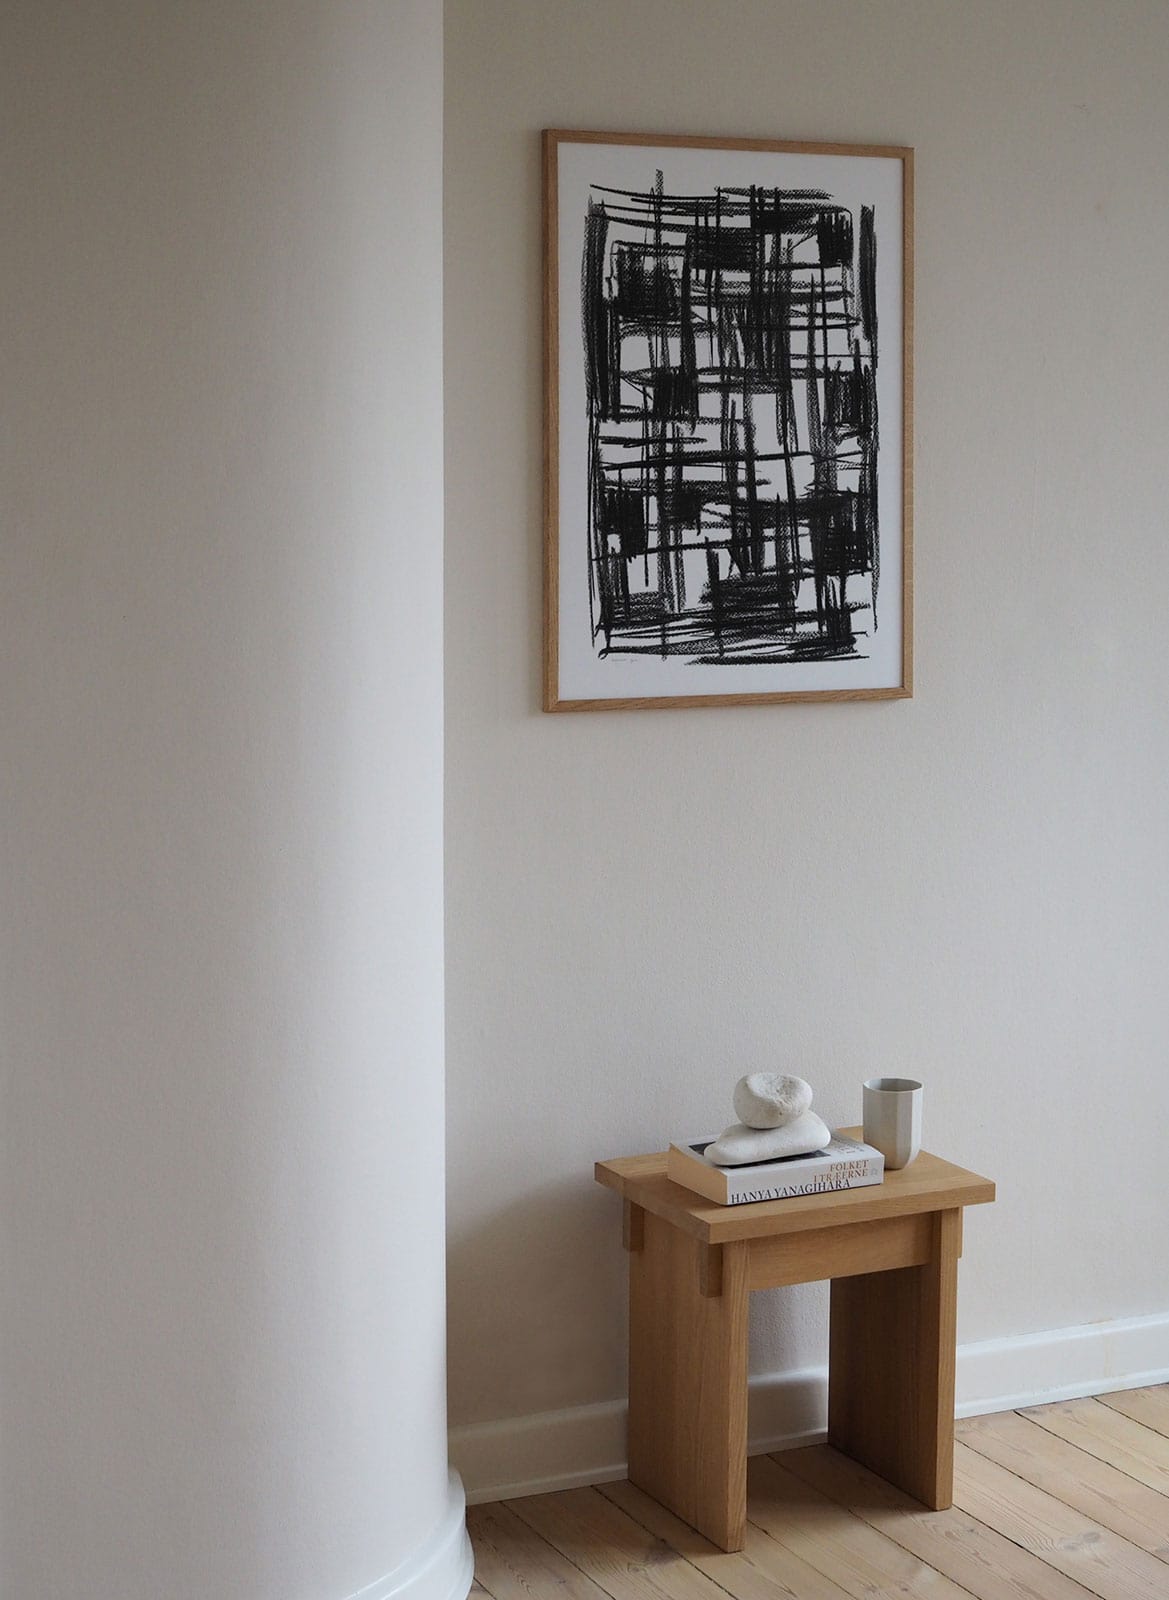 Framed minimalistic poster hanging above a table by Atelier Cph